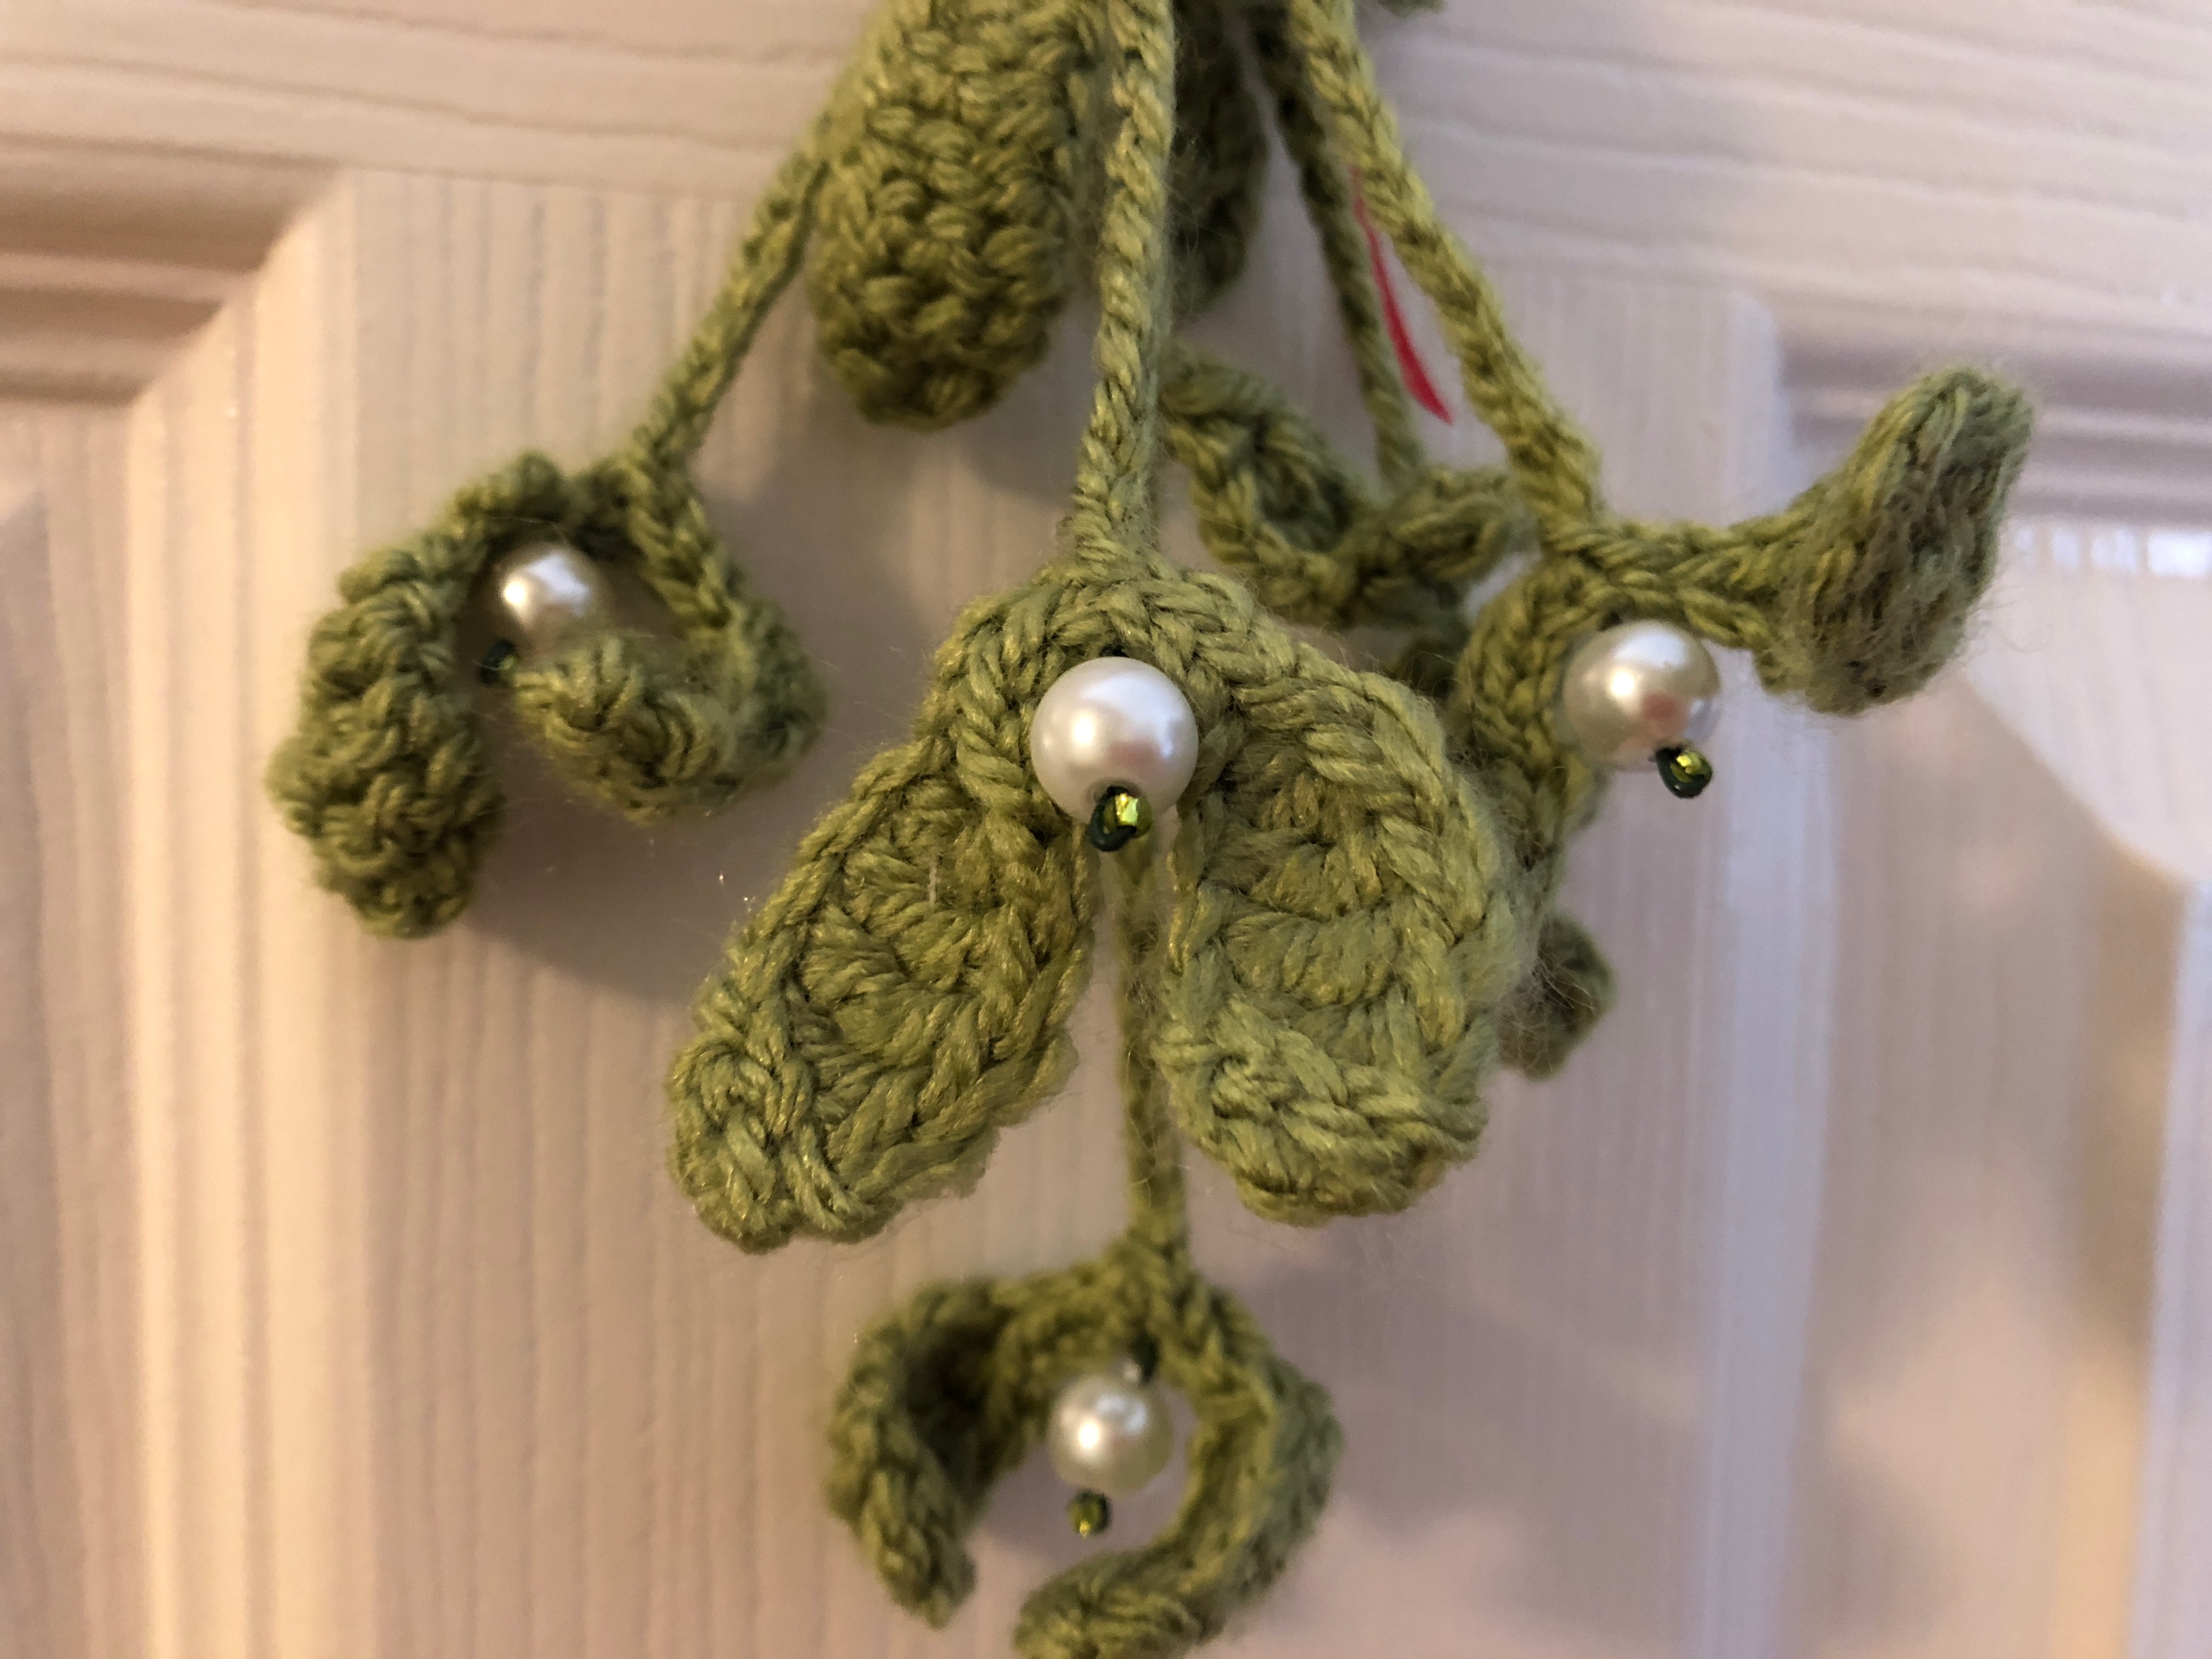 Handmade, crocheted bunch of wired green mistletoe, with white pearl and green glass bead berries and a red ribbon bow.